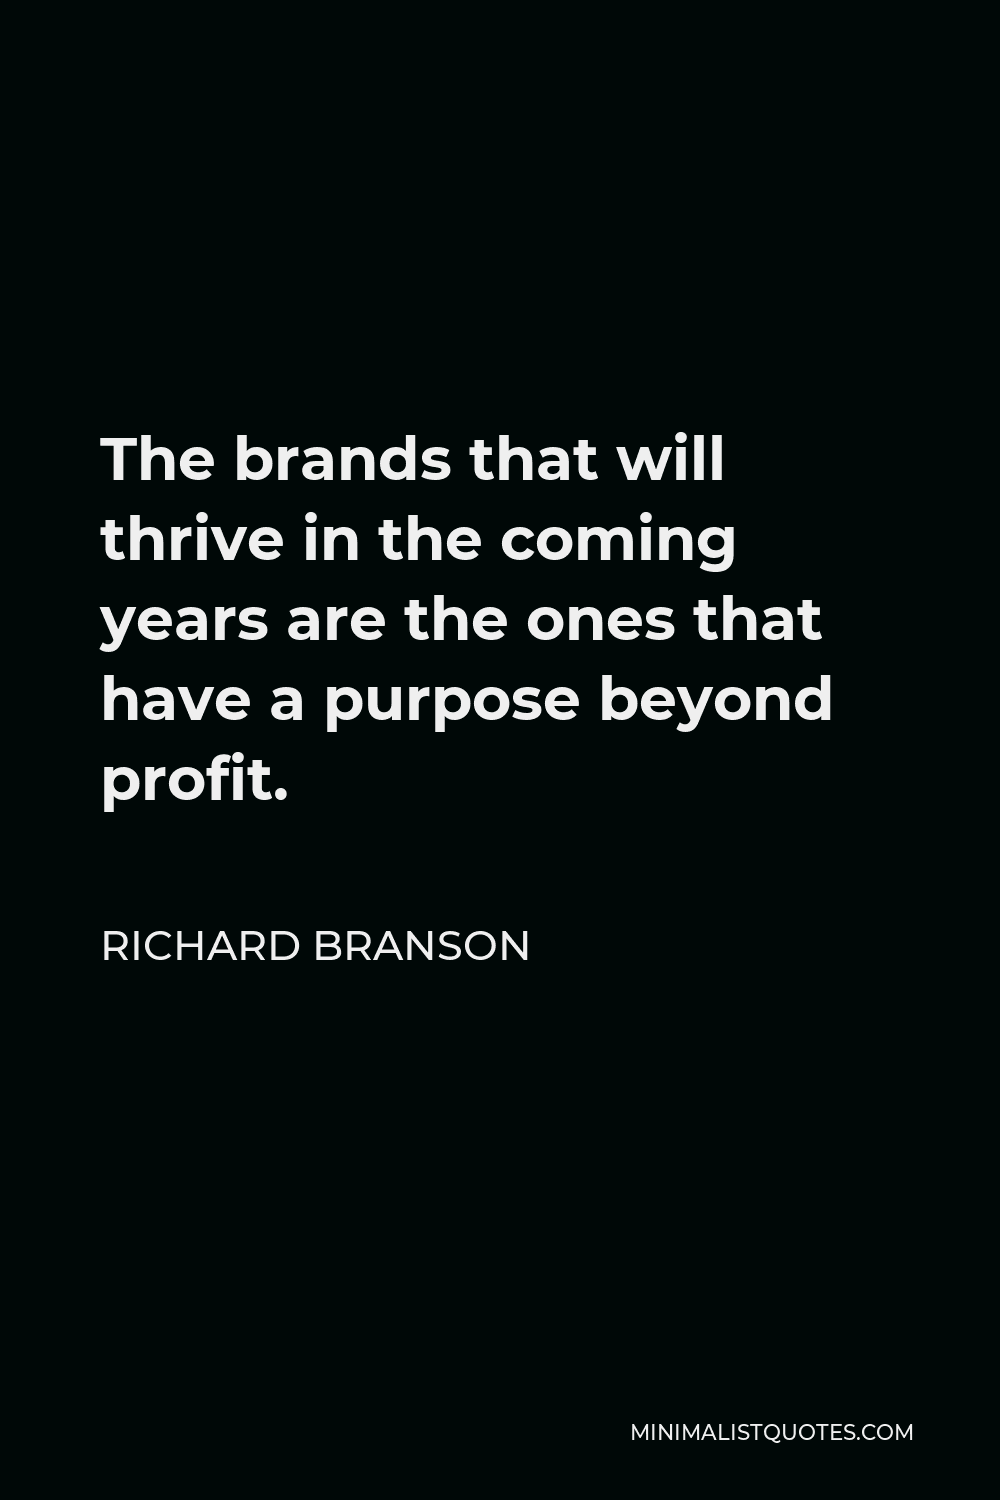 Richard Branson Quote - The brands that will thrive in the coming years are the ones that have a purpose beyond profit.